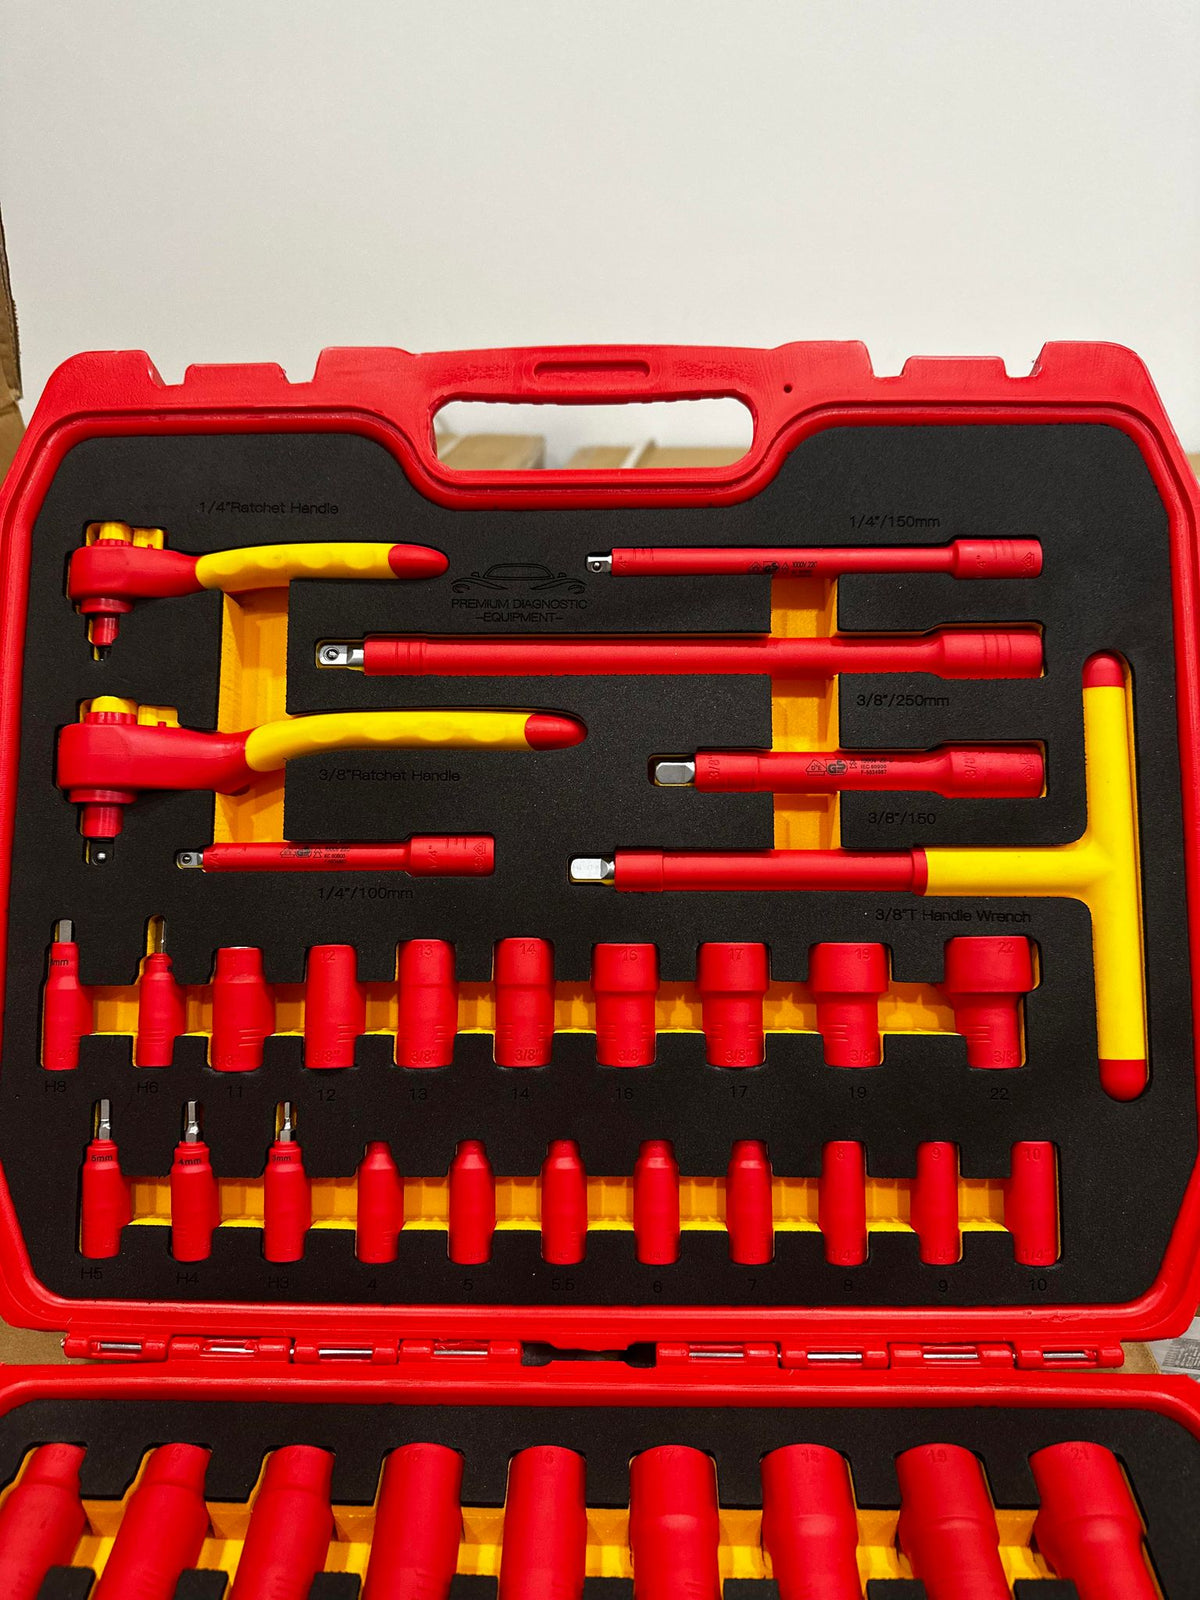 insulated tool set socket and ratchet kit for live line work australia